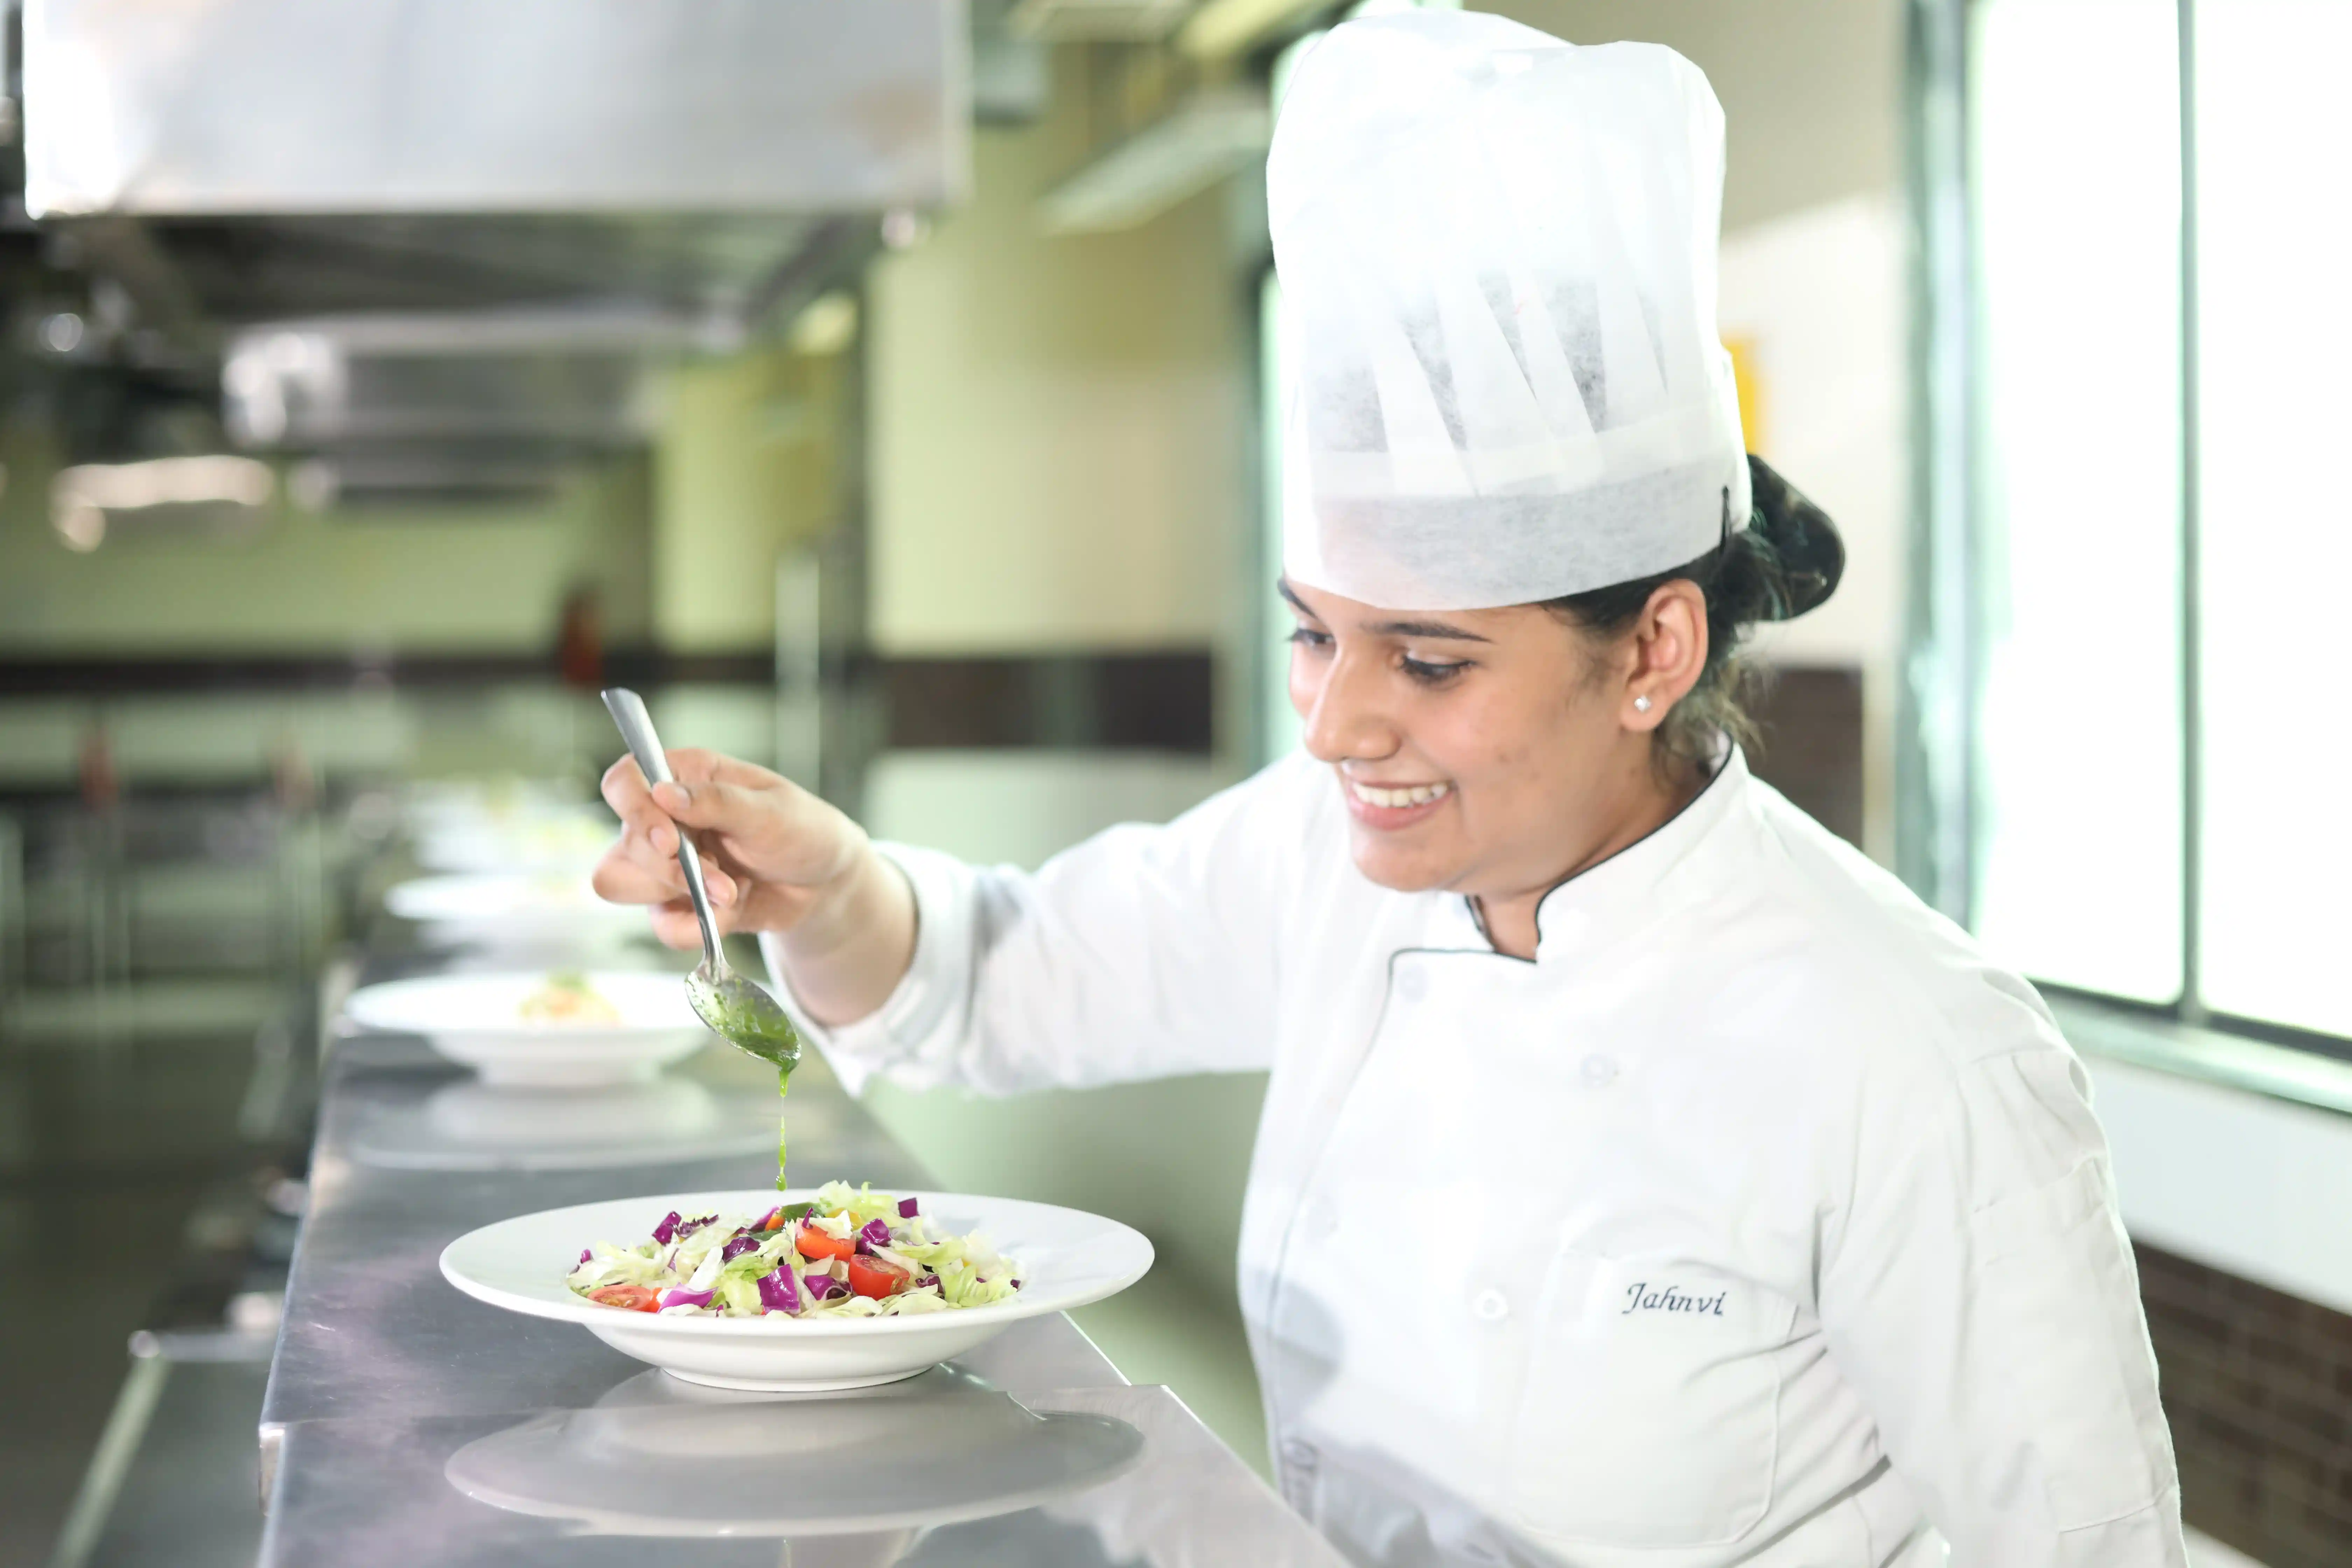 Why enroll in an Indian hotel management program?